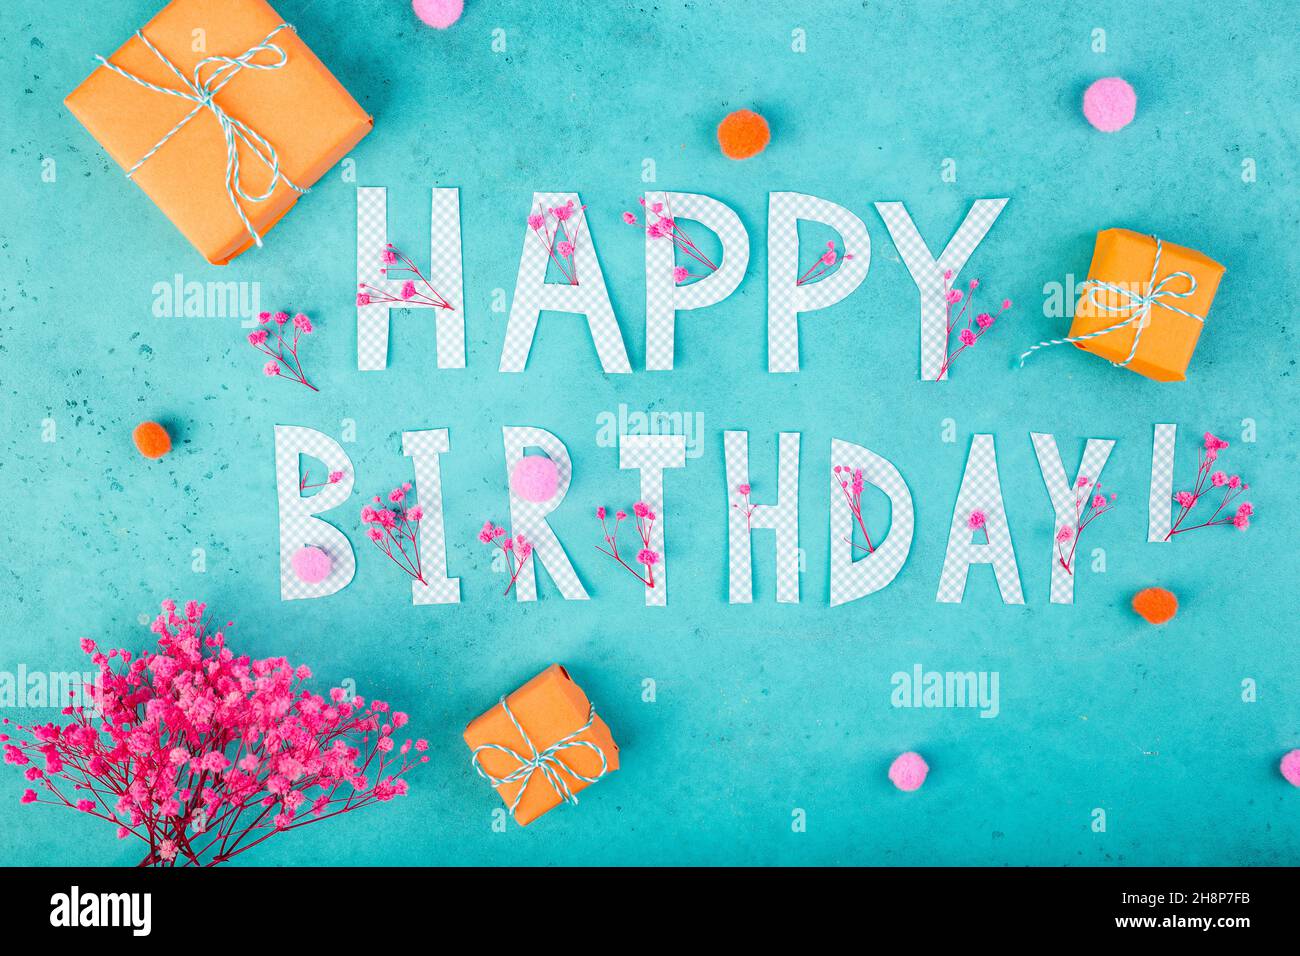 Happy birthday background with letters, orange gifts, pink flowers on turquoise blue background Stock Photo